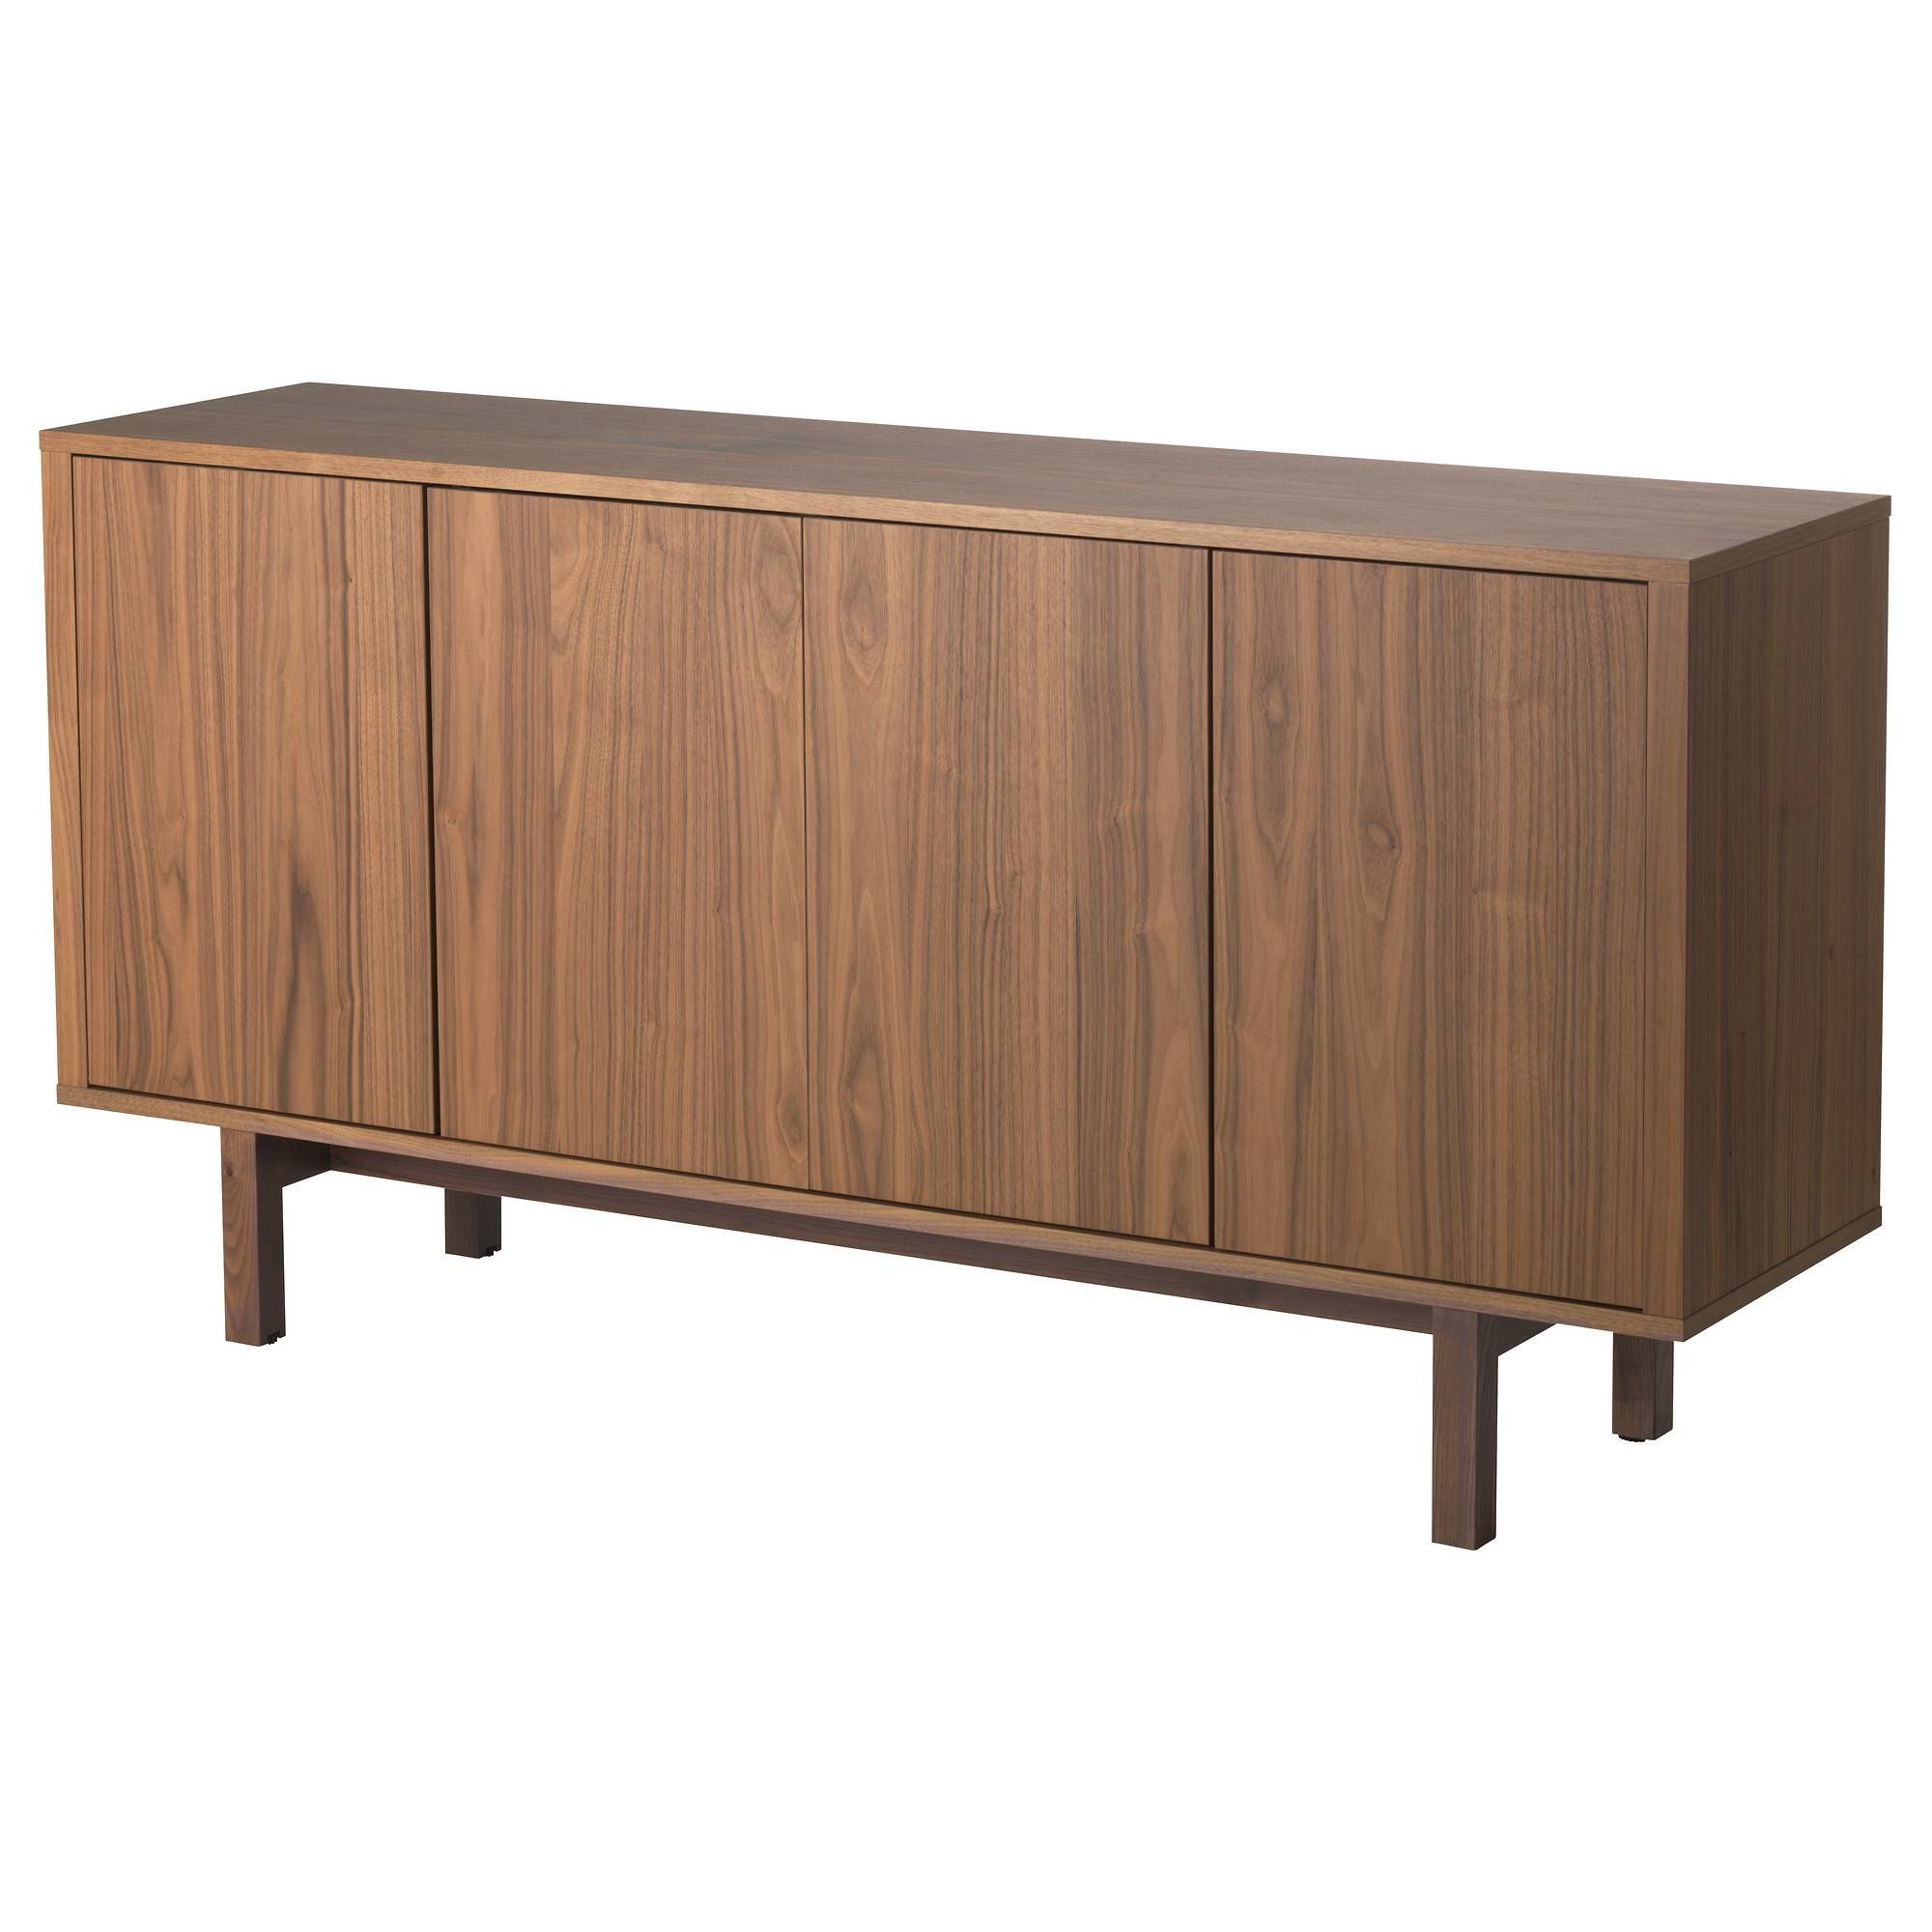 Stockholm Sideboard – Ikea In Canada Ikea Sideboards (View 6 of 15)